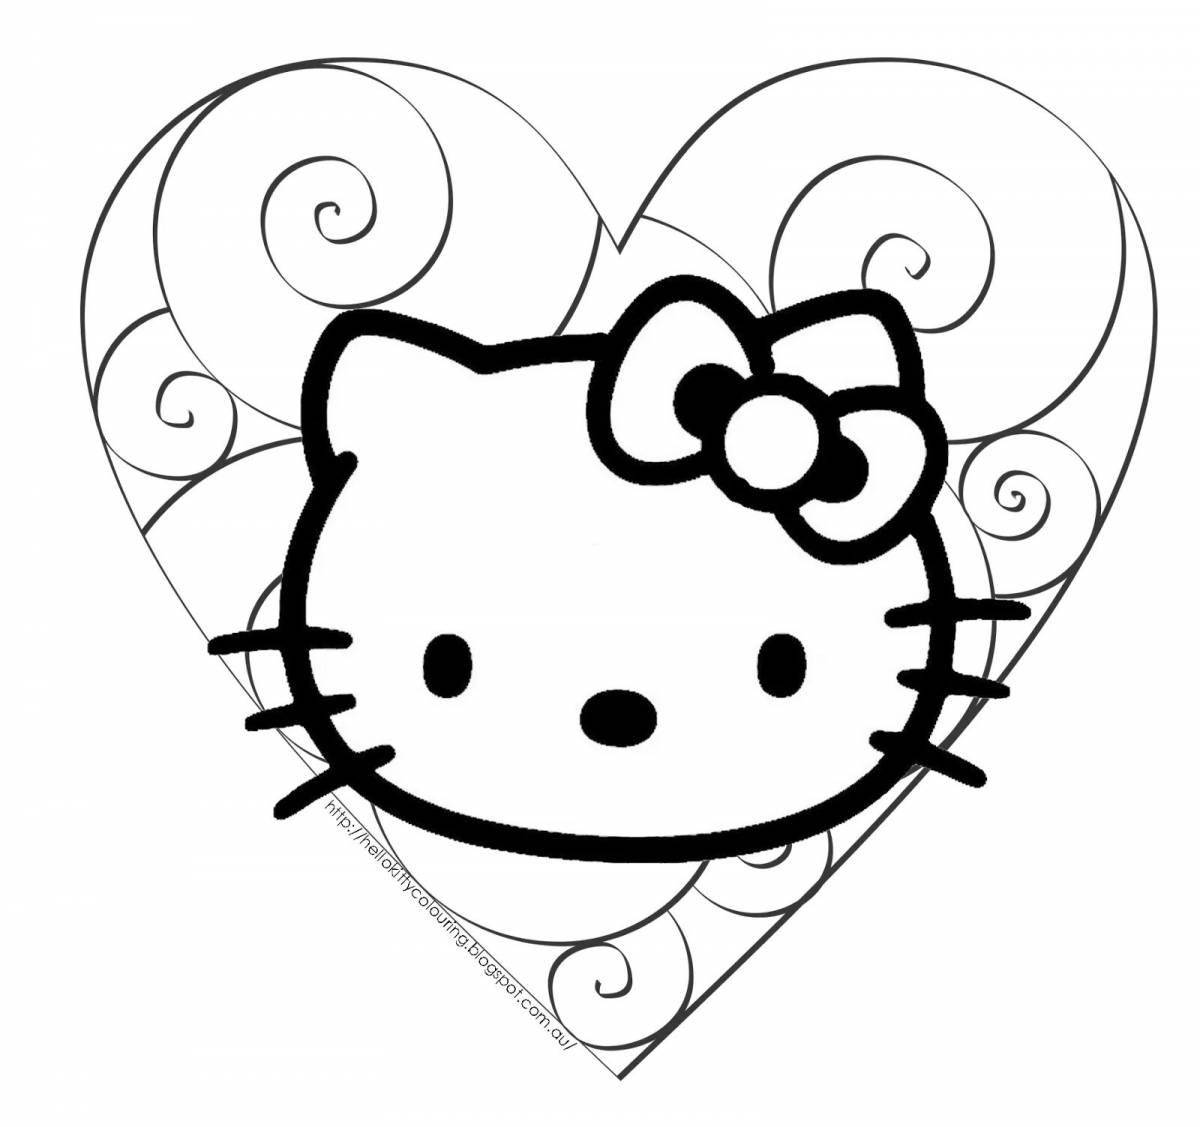 Adorable hello kitty coloring page